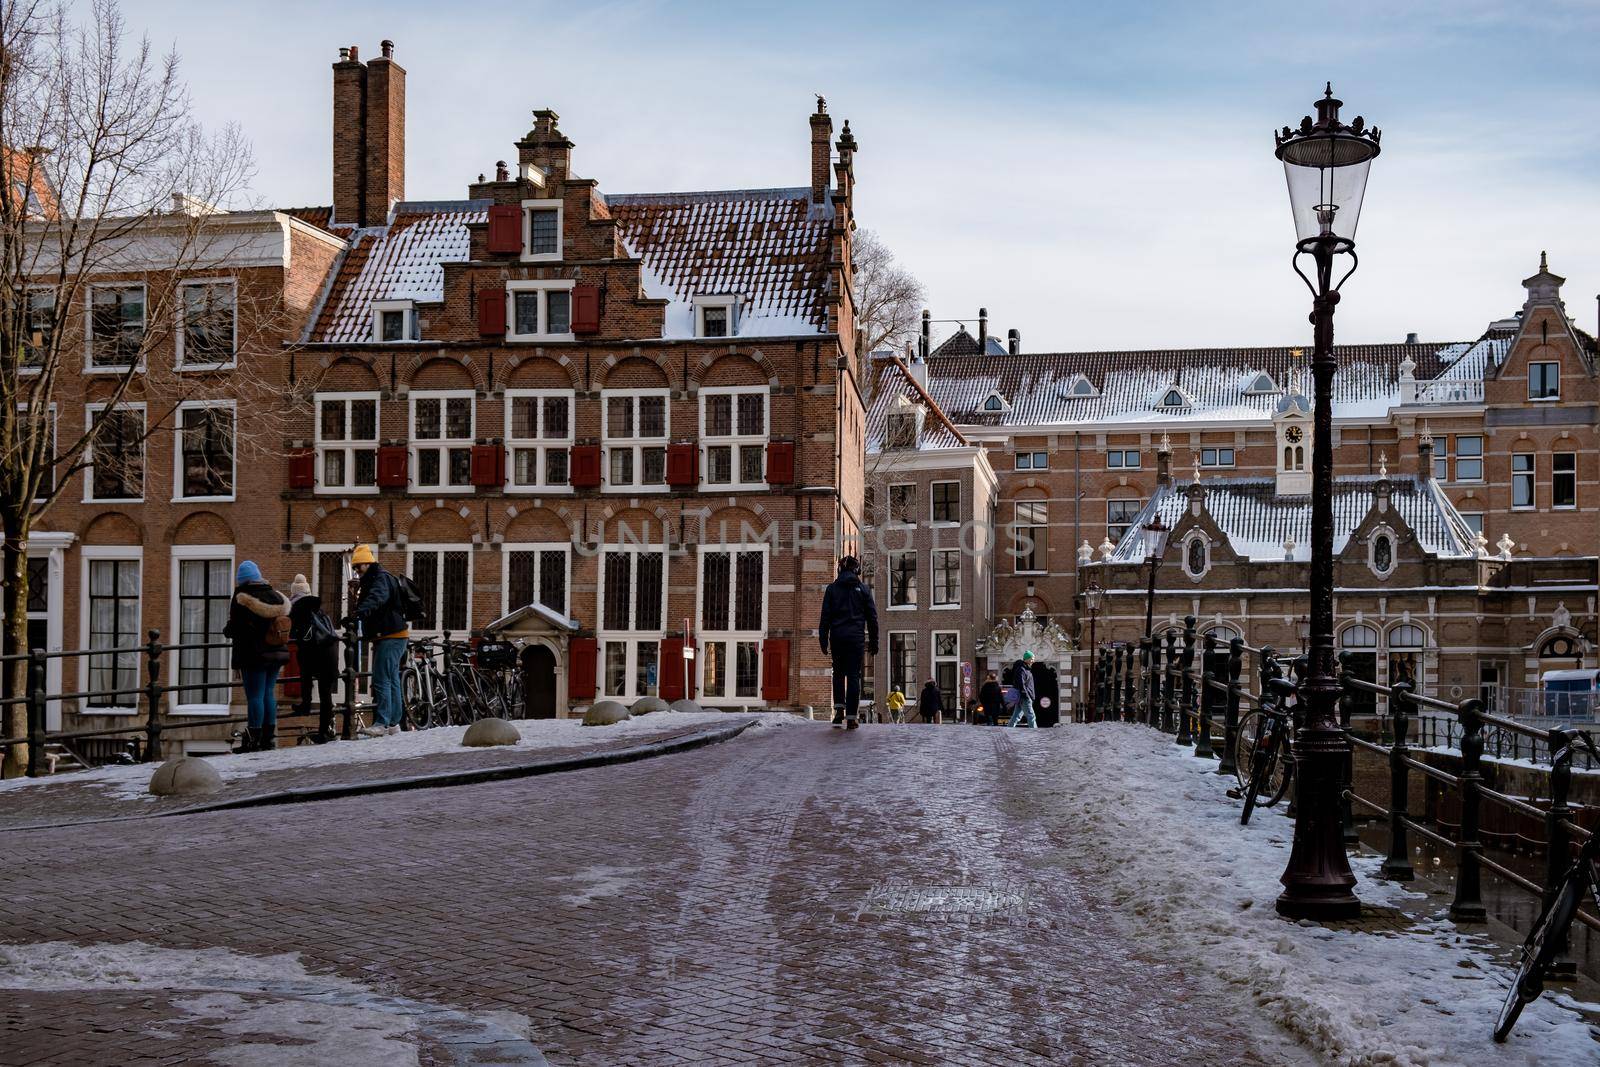 Amsterdam during winter with snowy streets. Amsterdam Netherlands February 2021